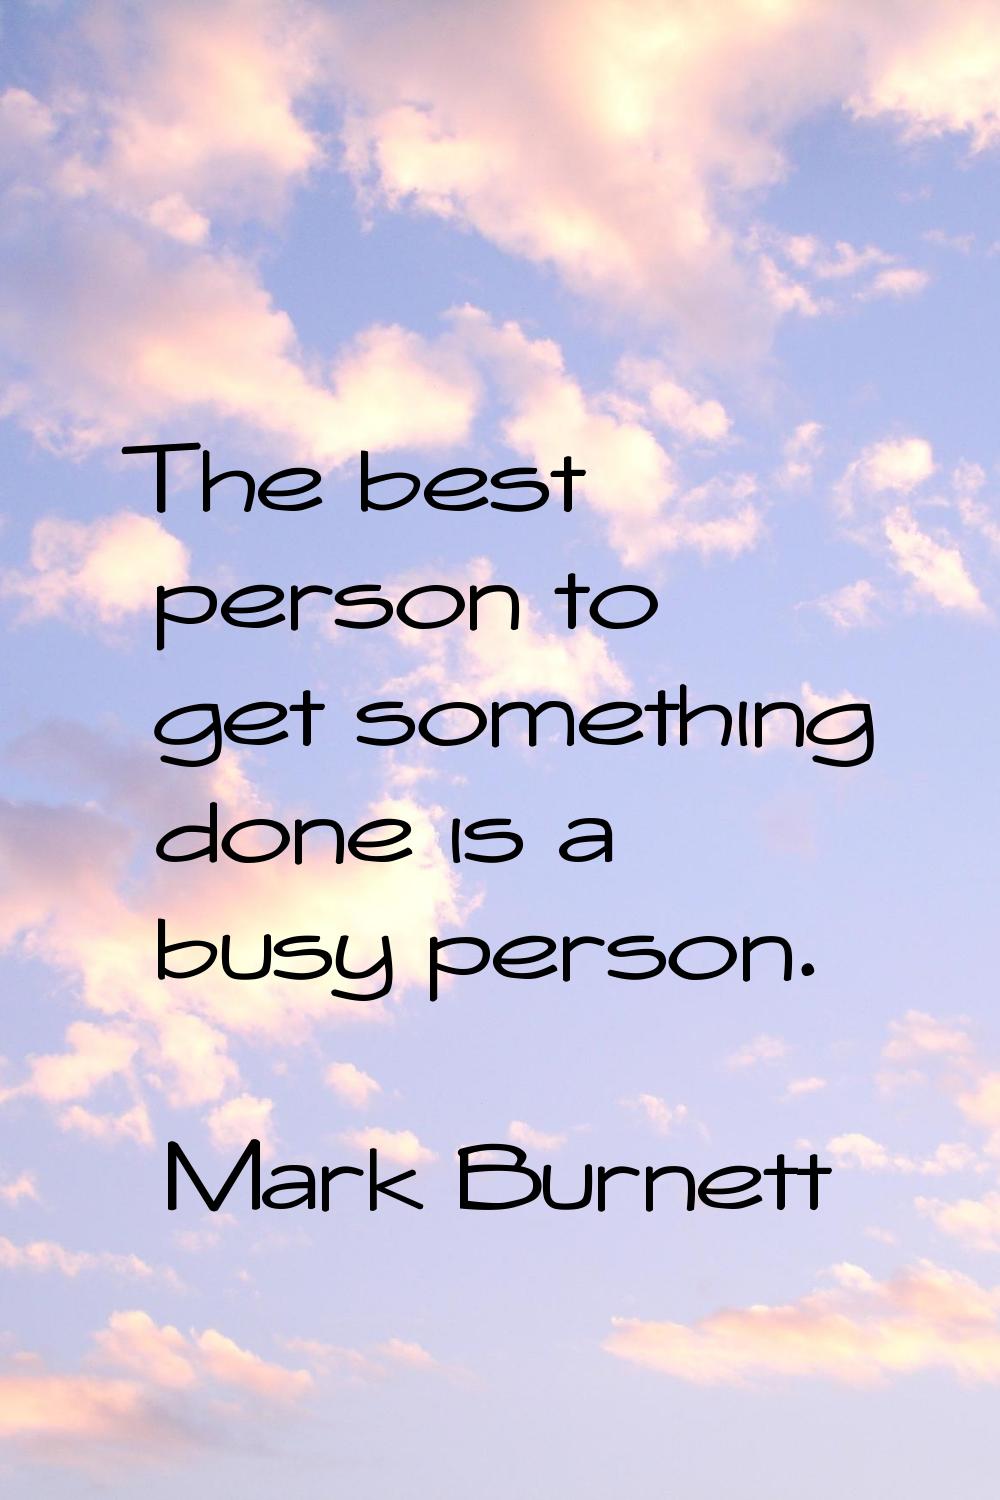 The best person to get something done is a busy person.